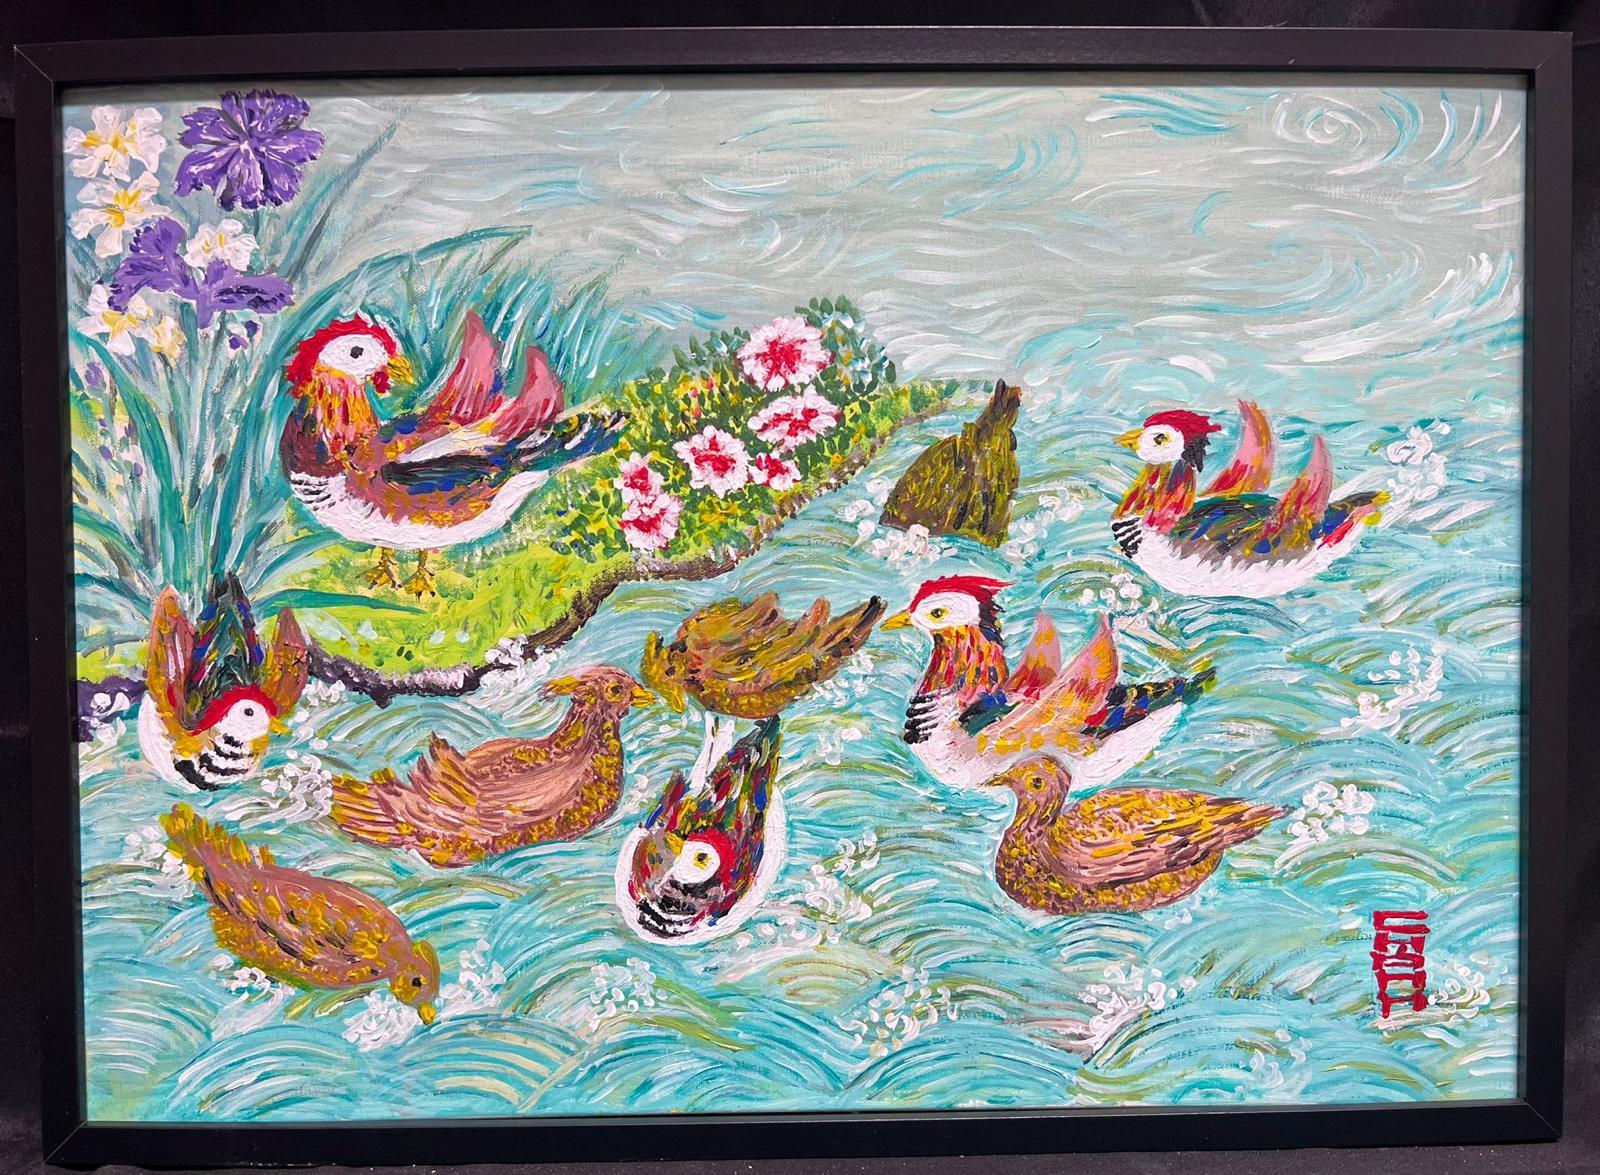 Birds on Pond
European artist, indistinctly signed 
late 20th century
oil on canvas, framed
framed: 21 x 29.75 inches
canvas: 19.75 x 28 inches
provenance: private collection
condition: very good and sound condition